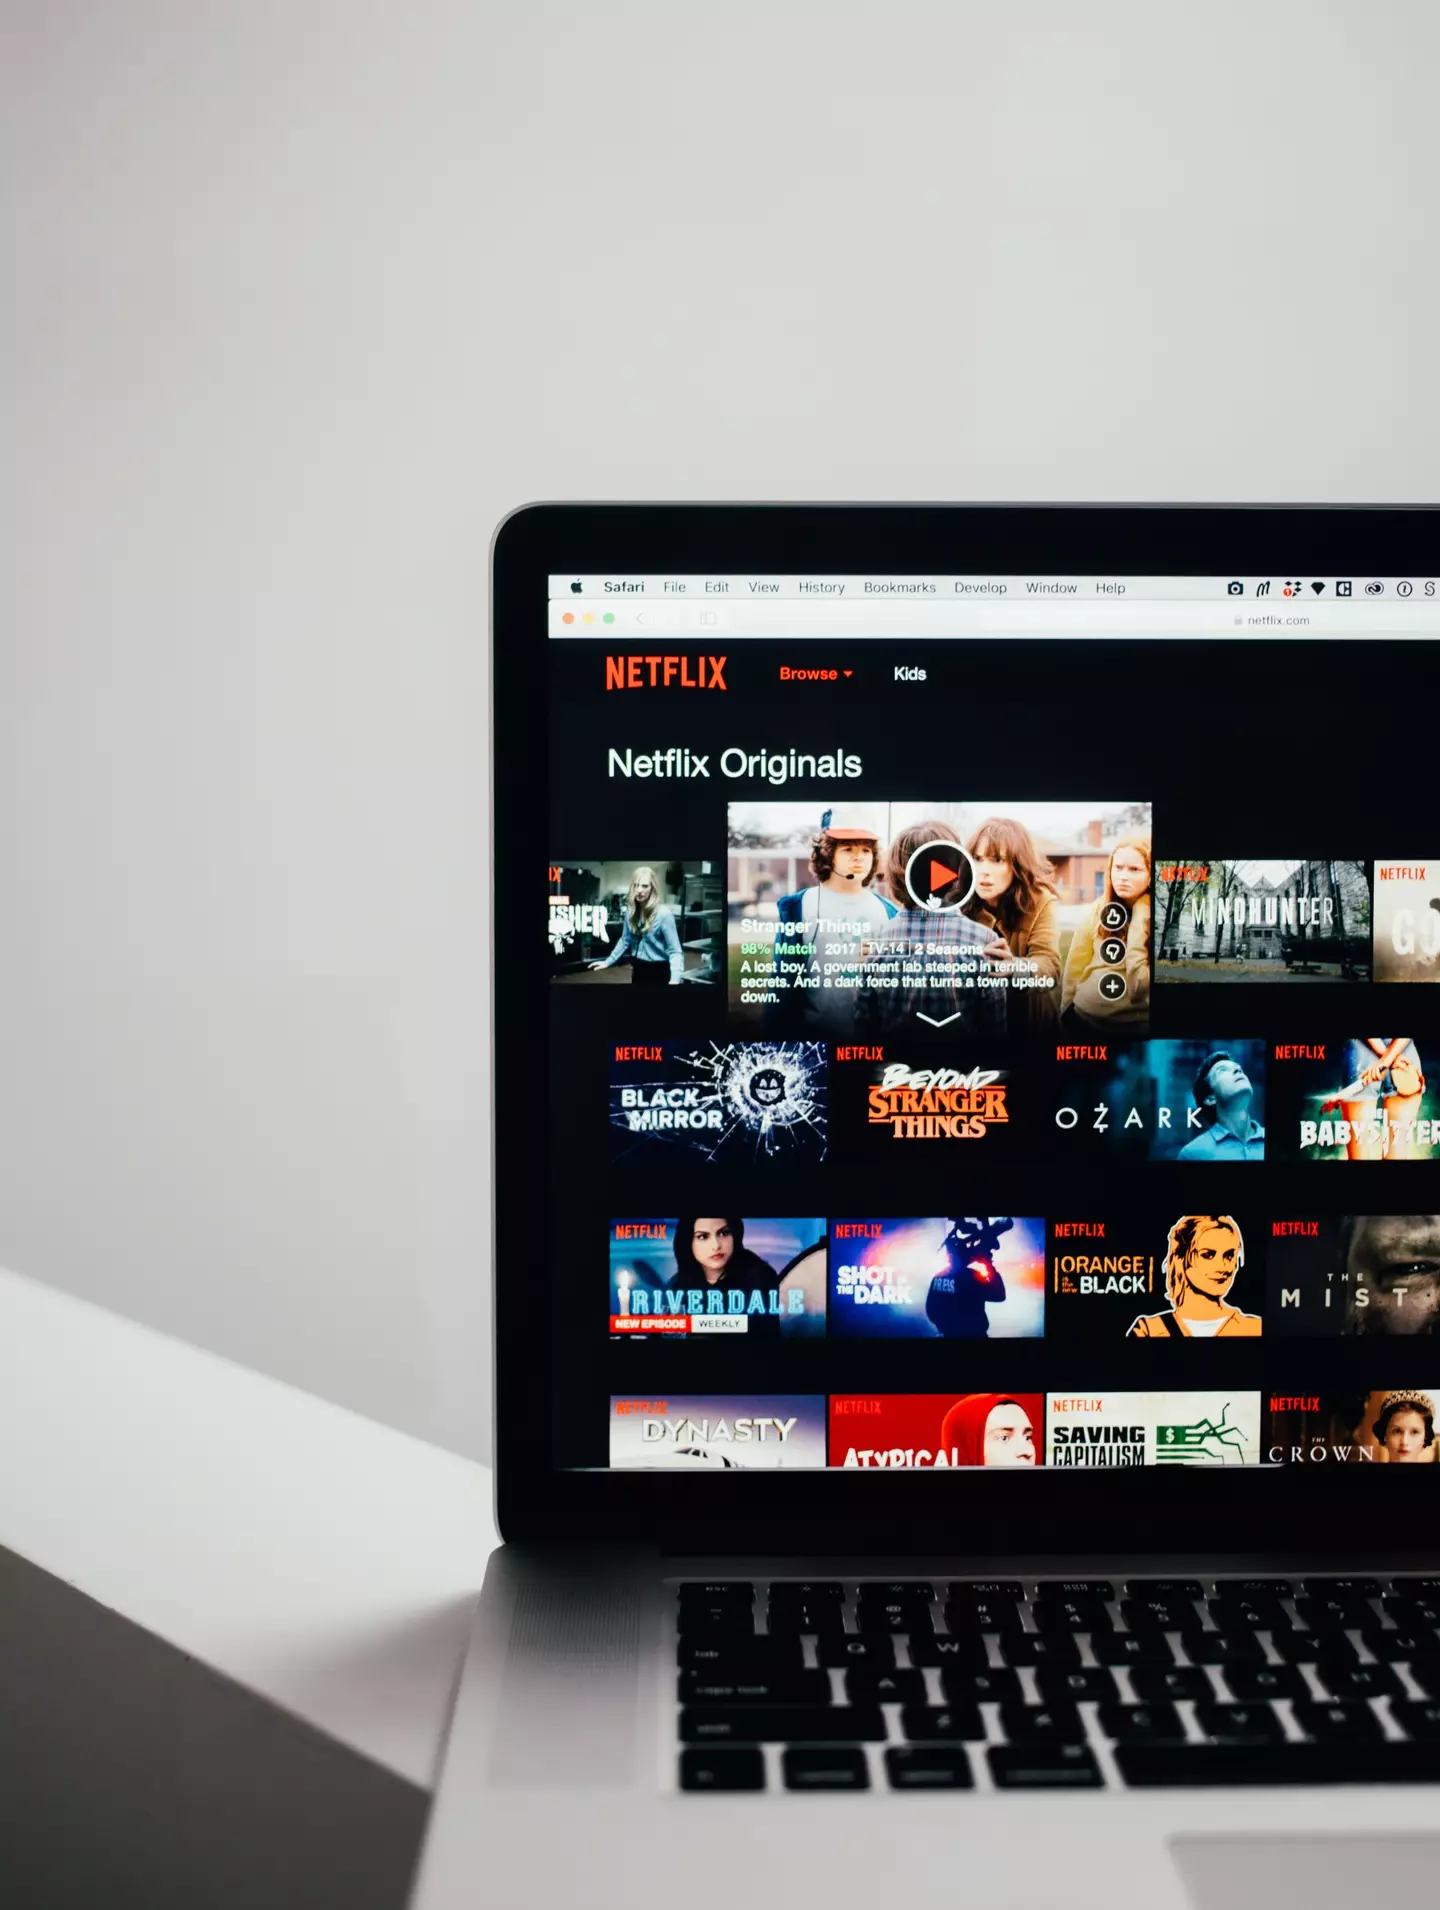 It wasn't until 2007 that Netflix expanded to its online Watch Now service.